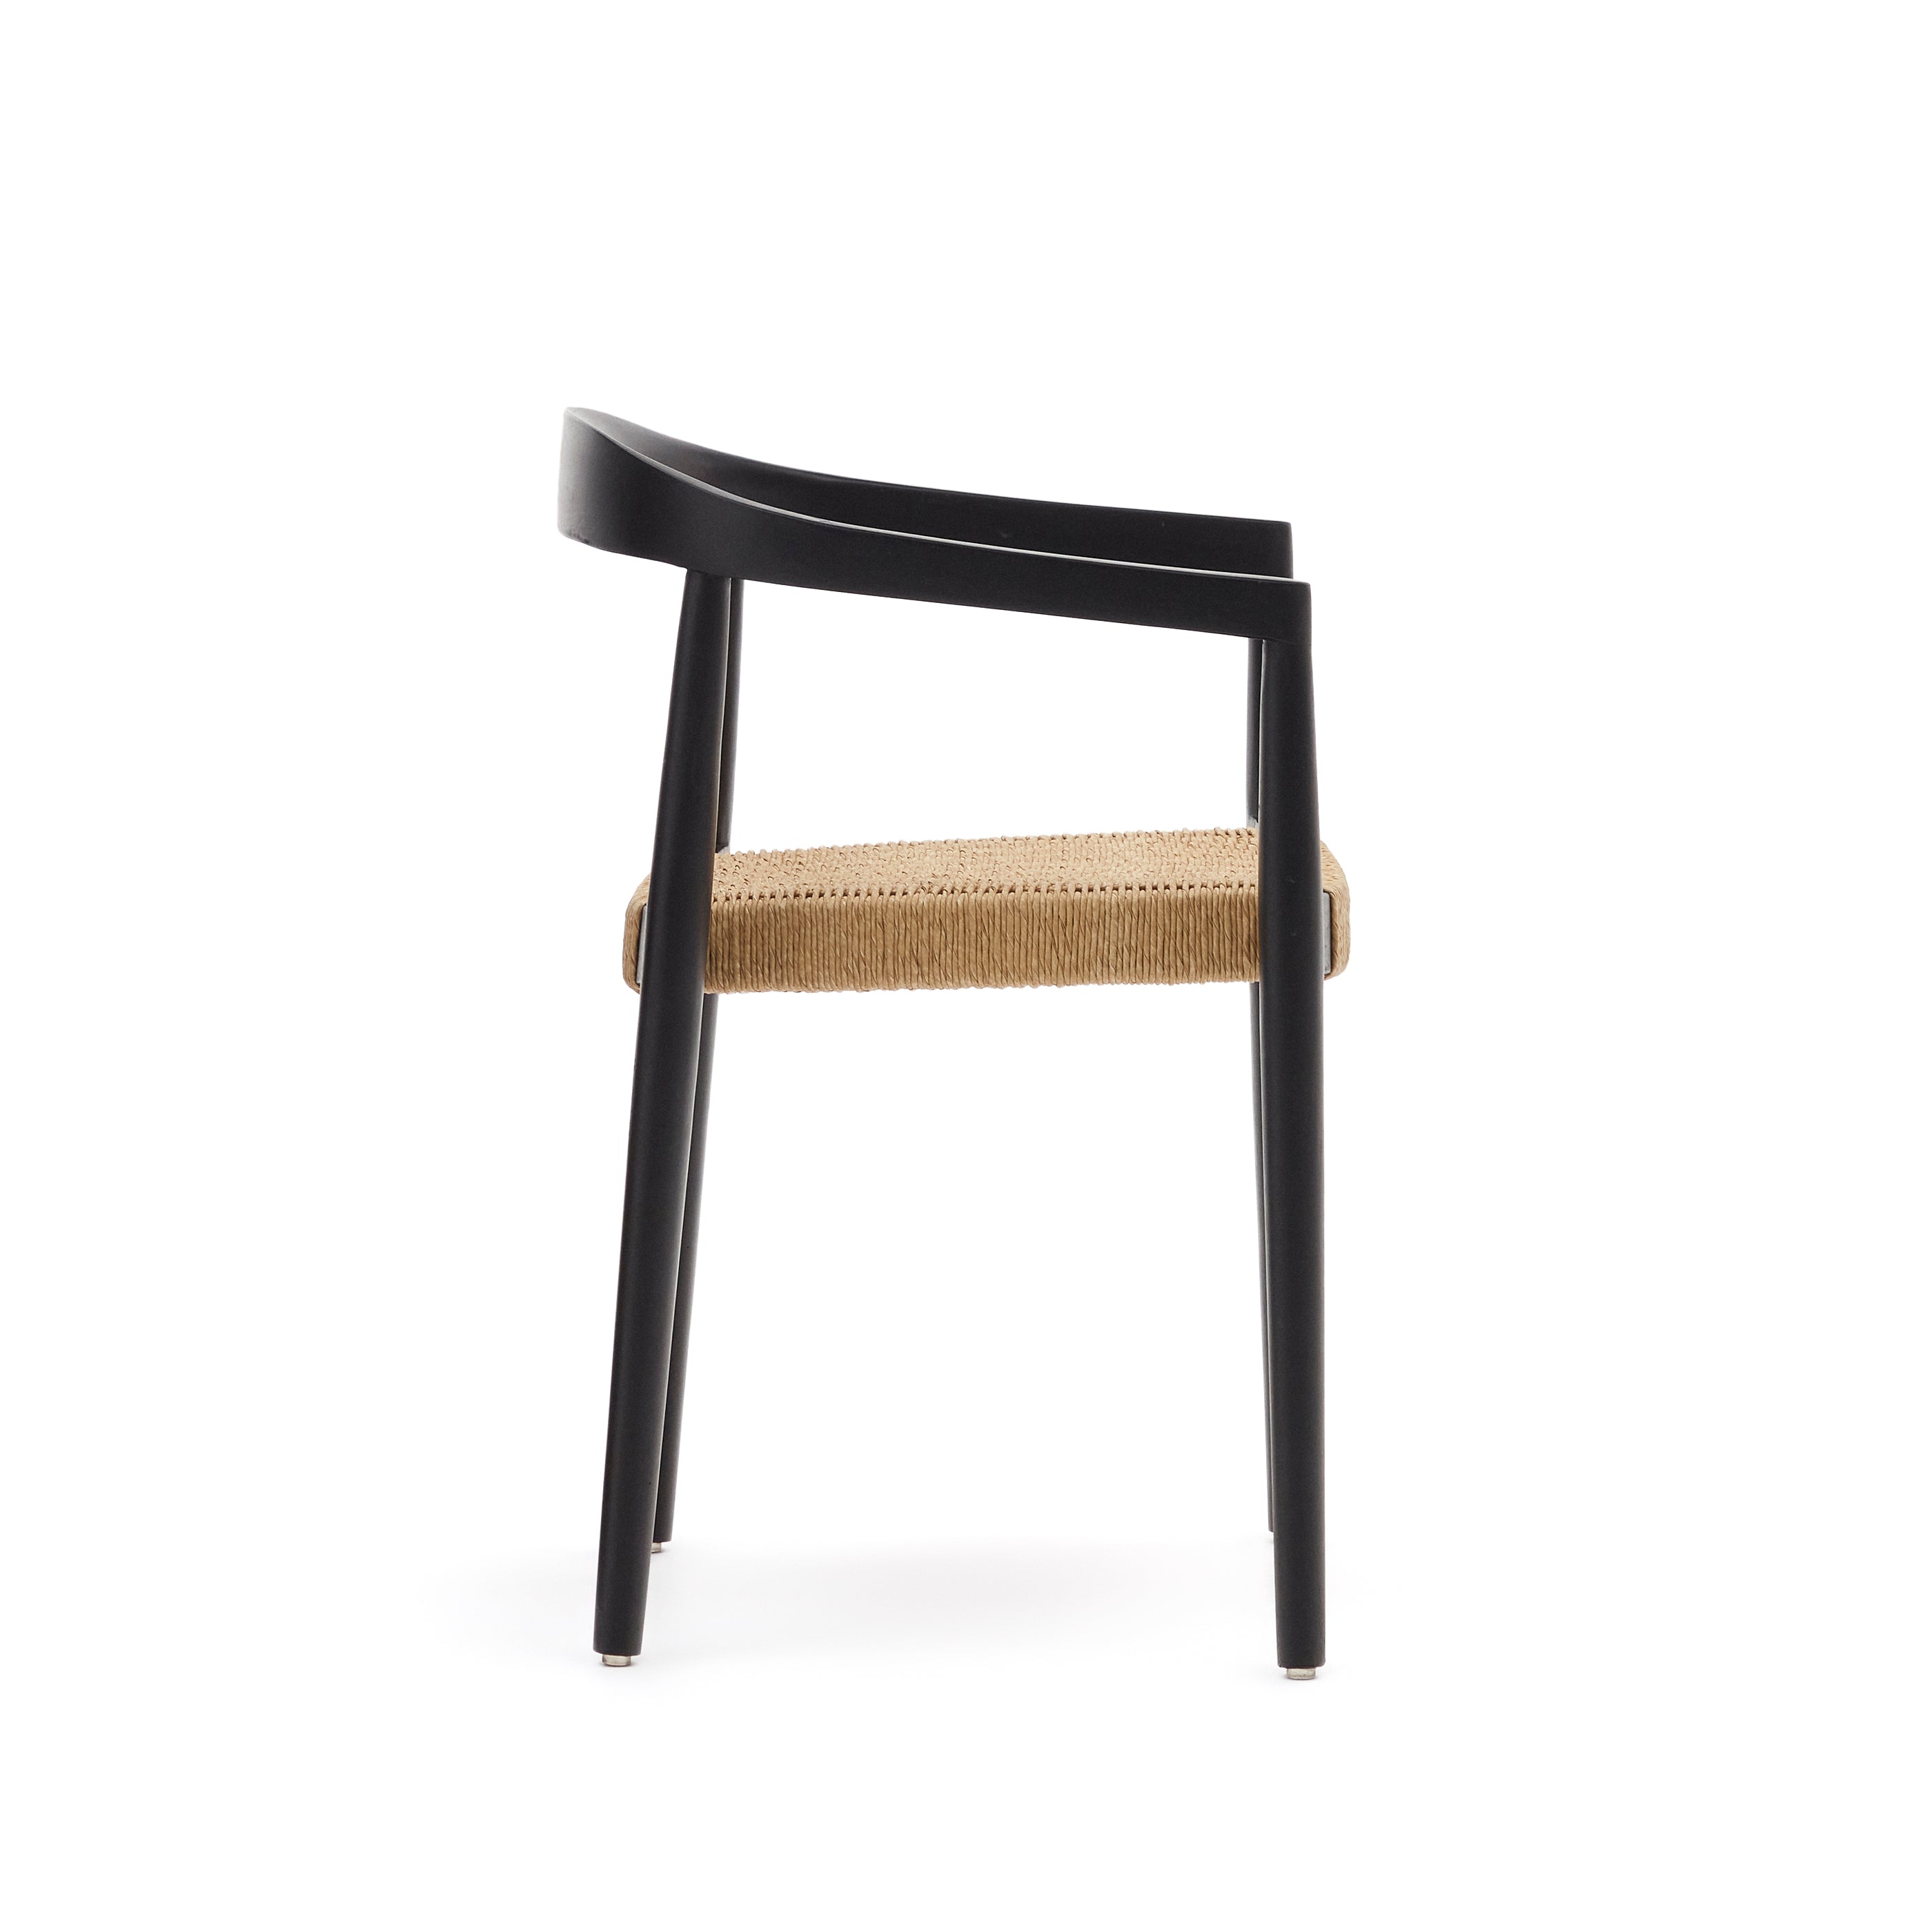 Ydalia stackable outdoor chair in solid teak wood with black finish and natural rope